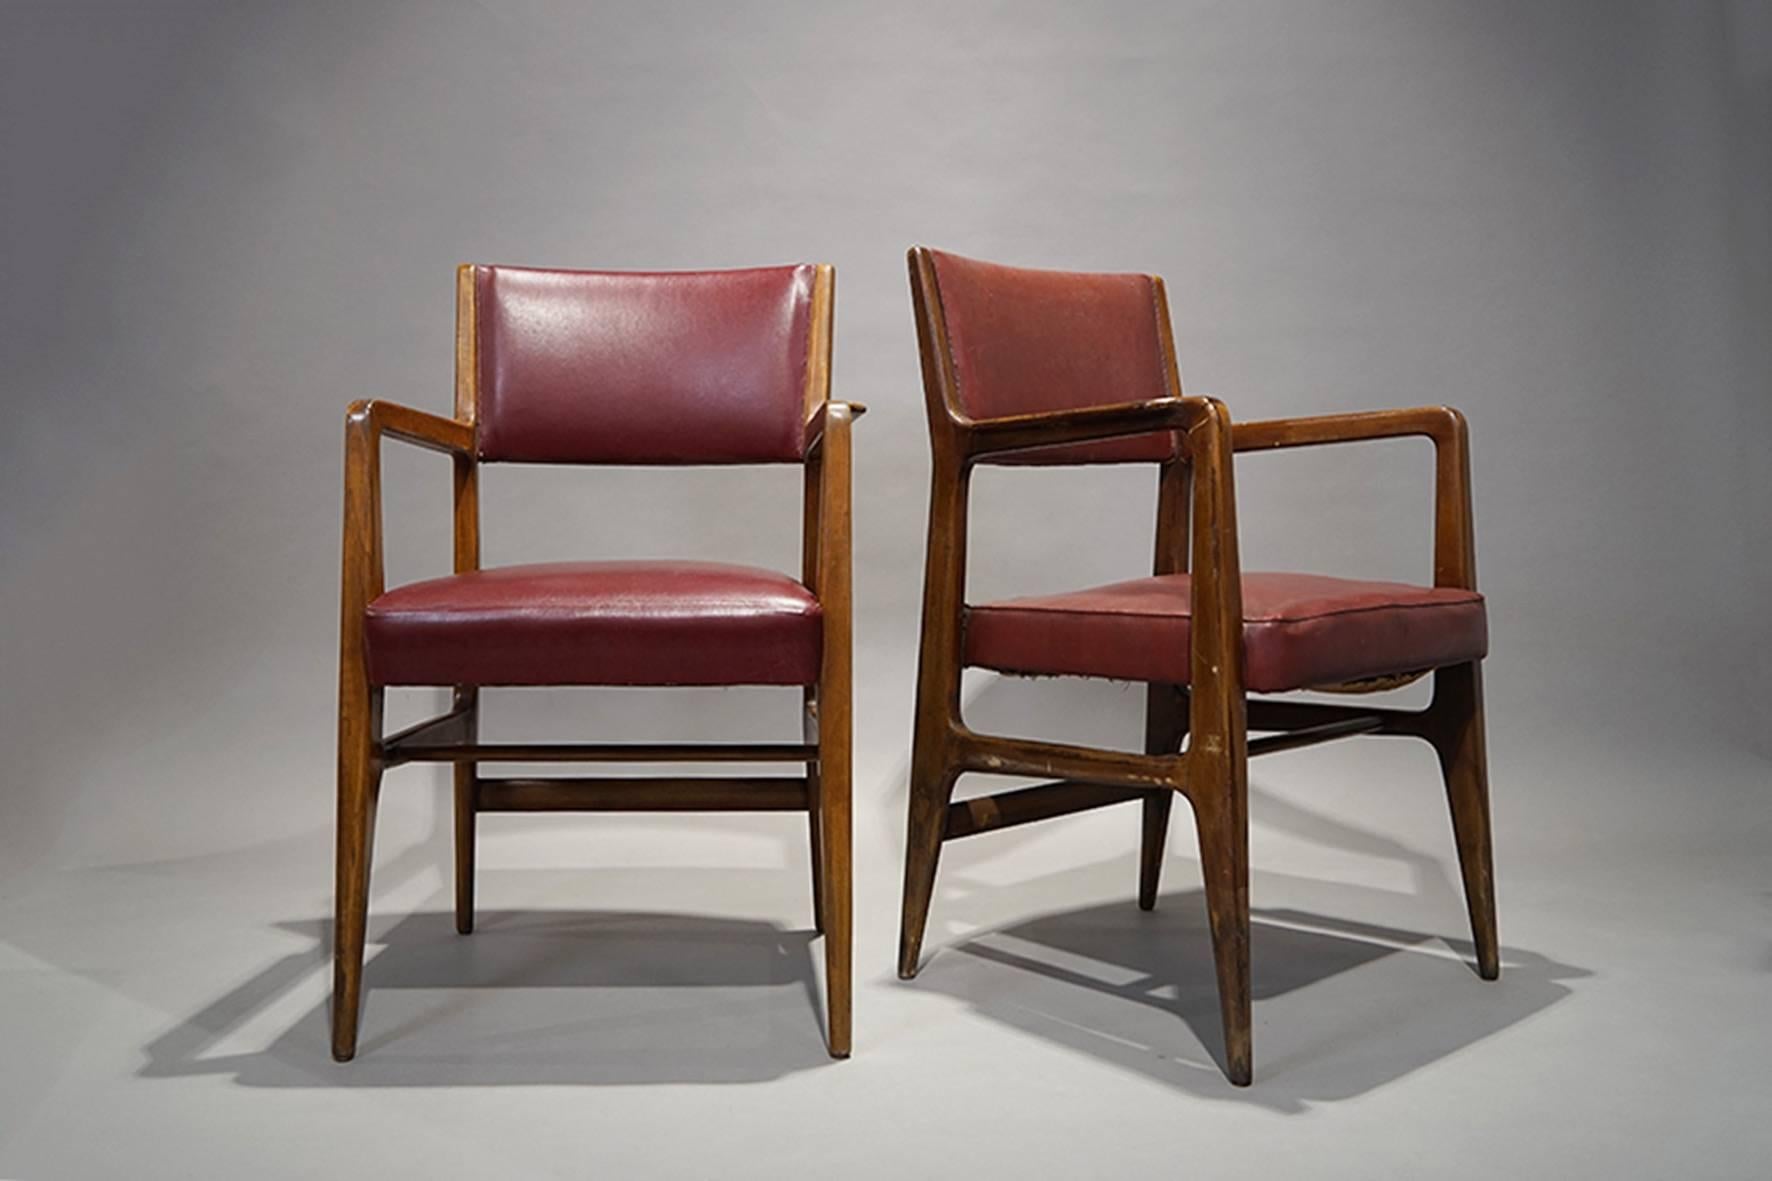 Pair of armchairs by Gio Ponti, Cassina, 1950.

Cover vinyl.